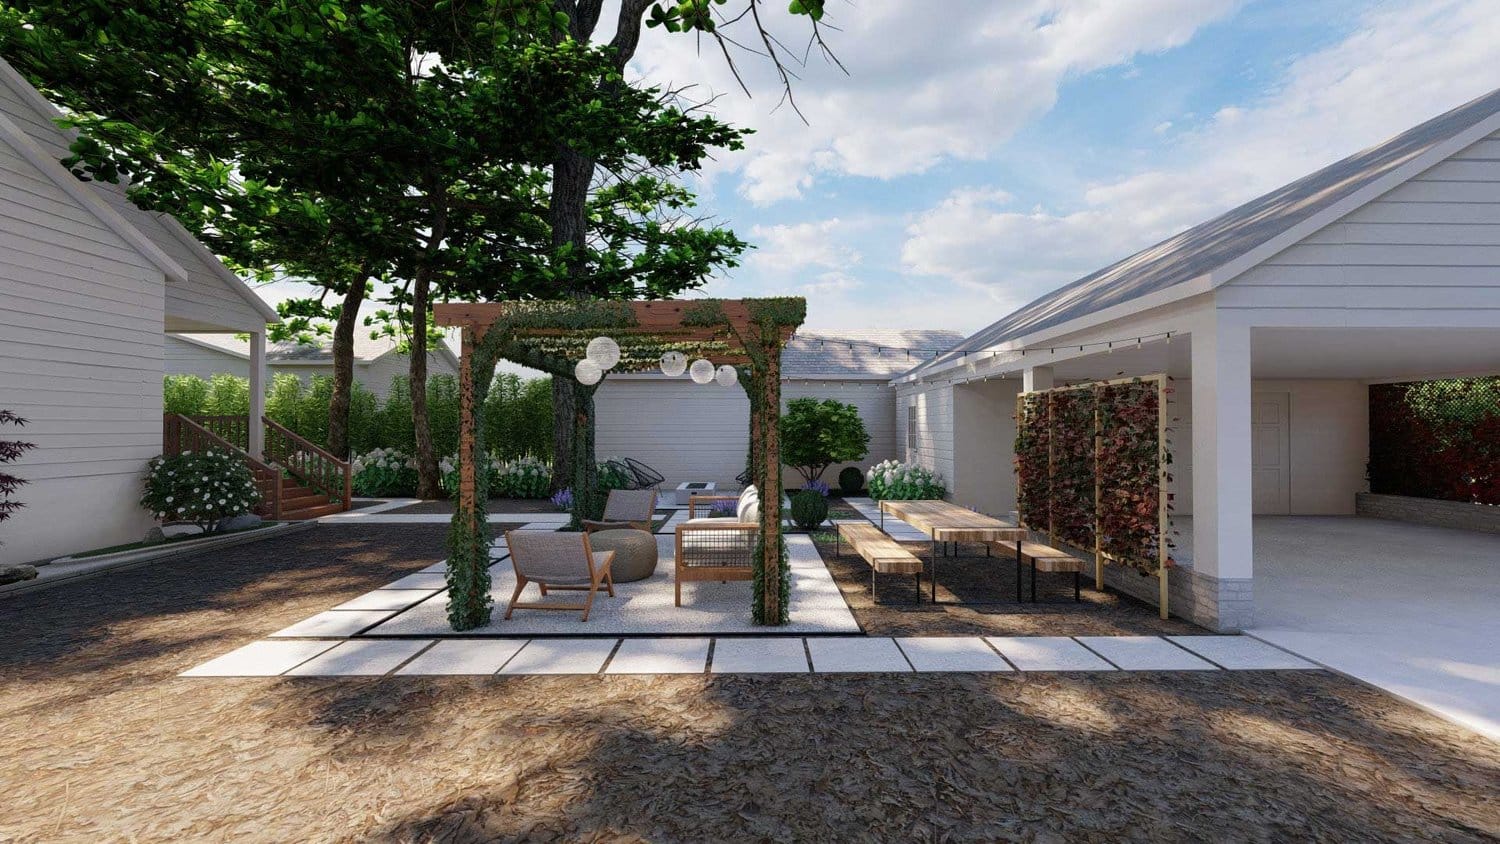 Charlotte side yard with pergola over concrete patio seating area and concrete paver pathway